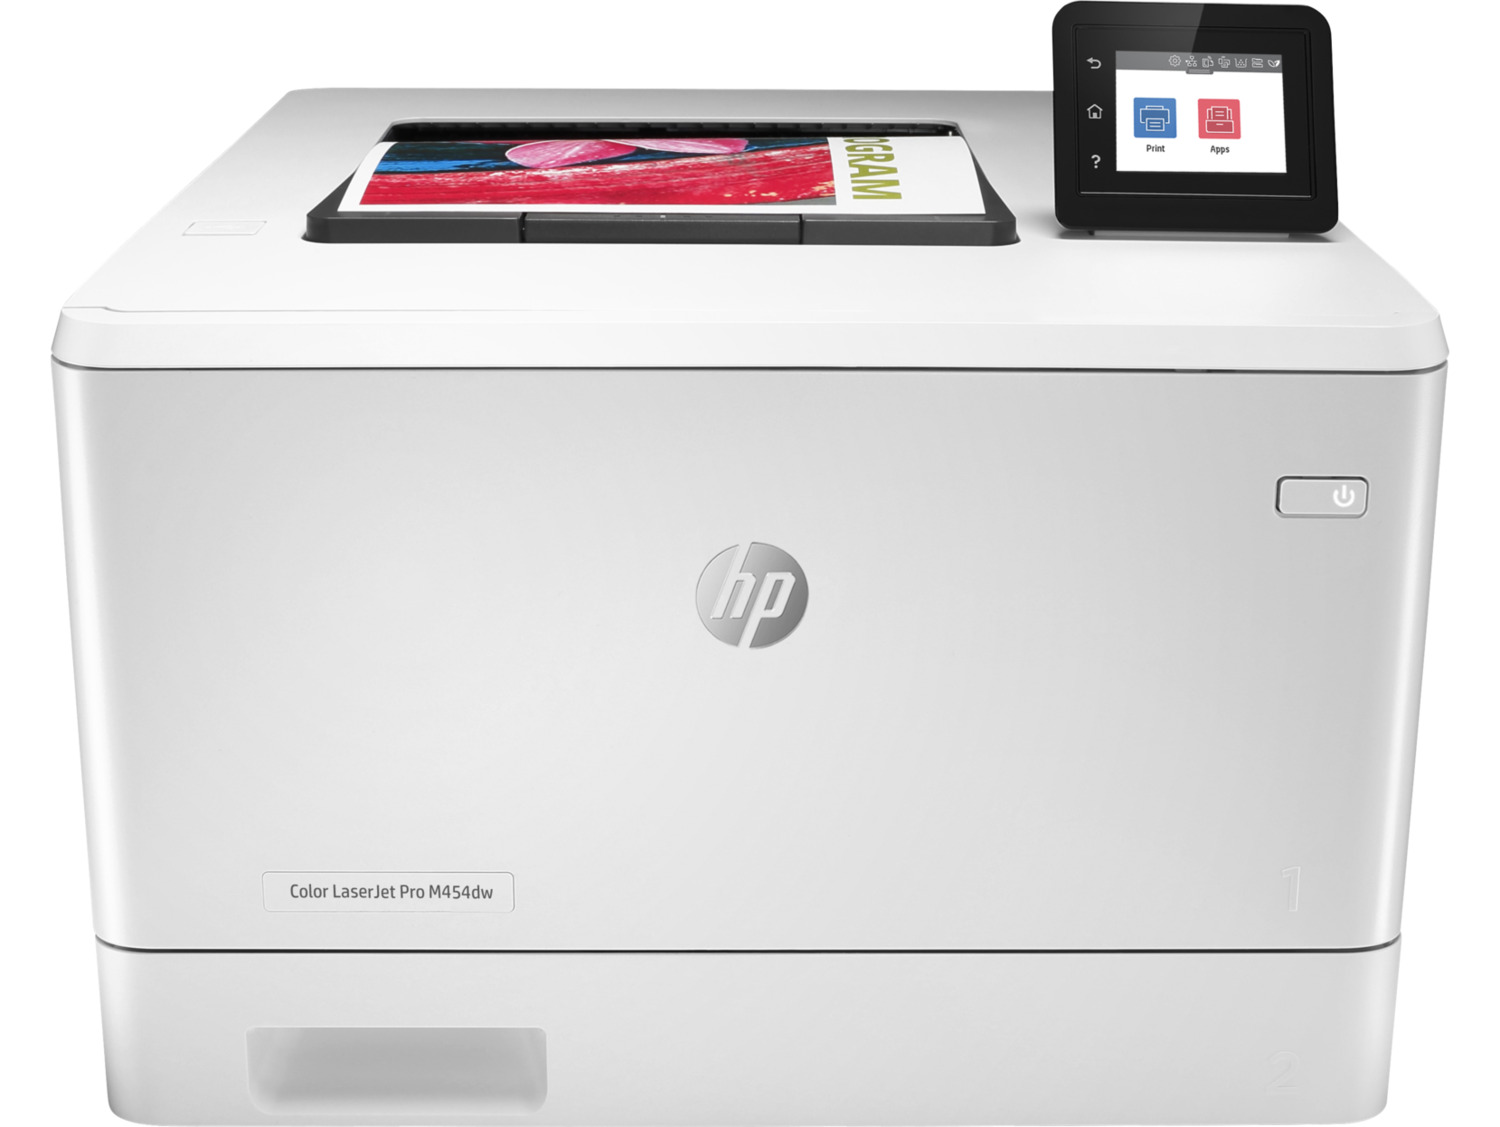 HP Color LaserJet Pro M454dw Printer (A4,600x600dpi,27(27)ppm,ImageREt3600,512Mb,Duplex, 2trays 50+250,USB 2.0/GigEth/WiFi/Bluetooth/Easy-access USB port,AirPrint, PS3, 1y warr, 4Ctgs1200pages in box) HP Inc. - фото 1